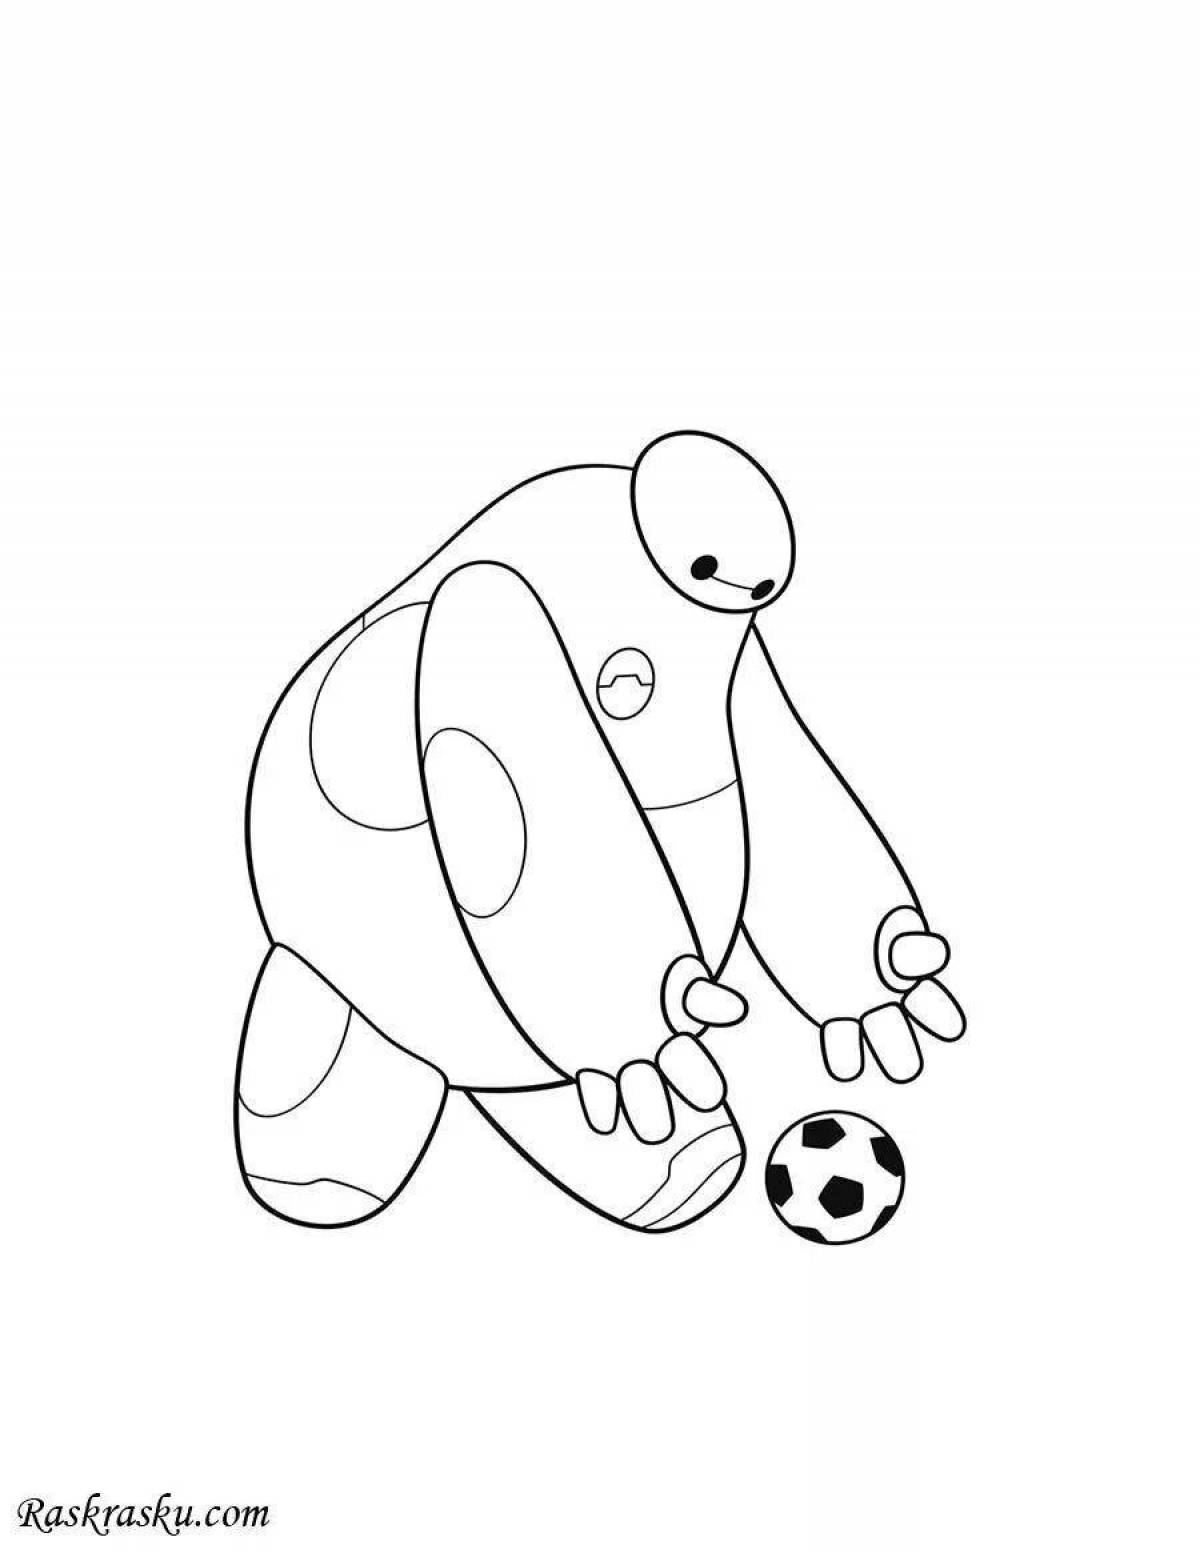 Dazzling Baymax Coloring Page